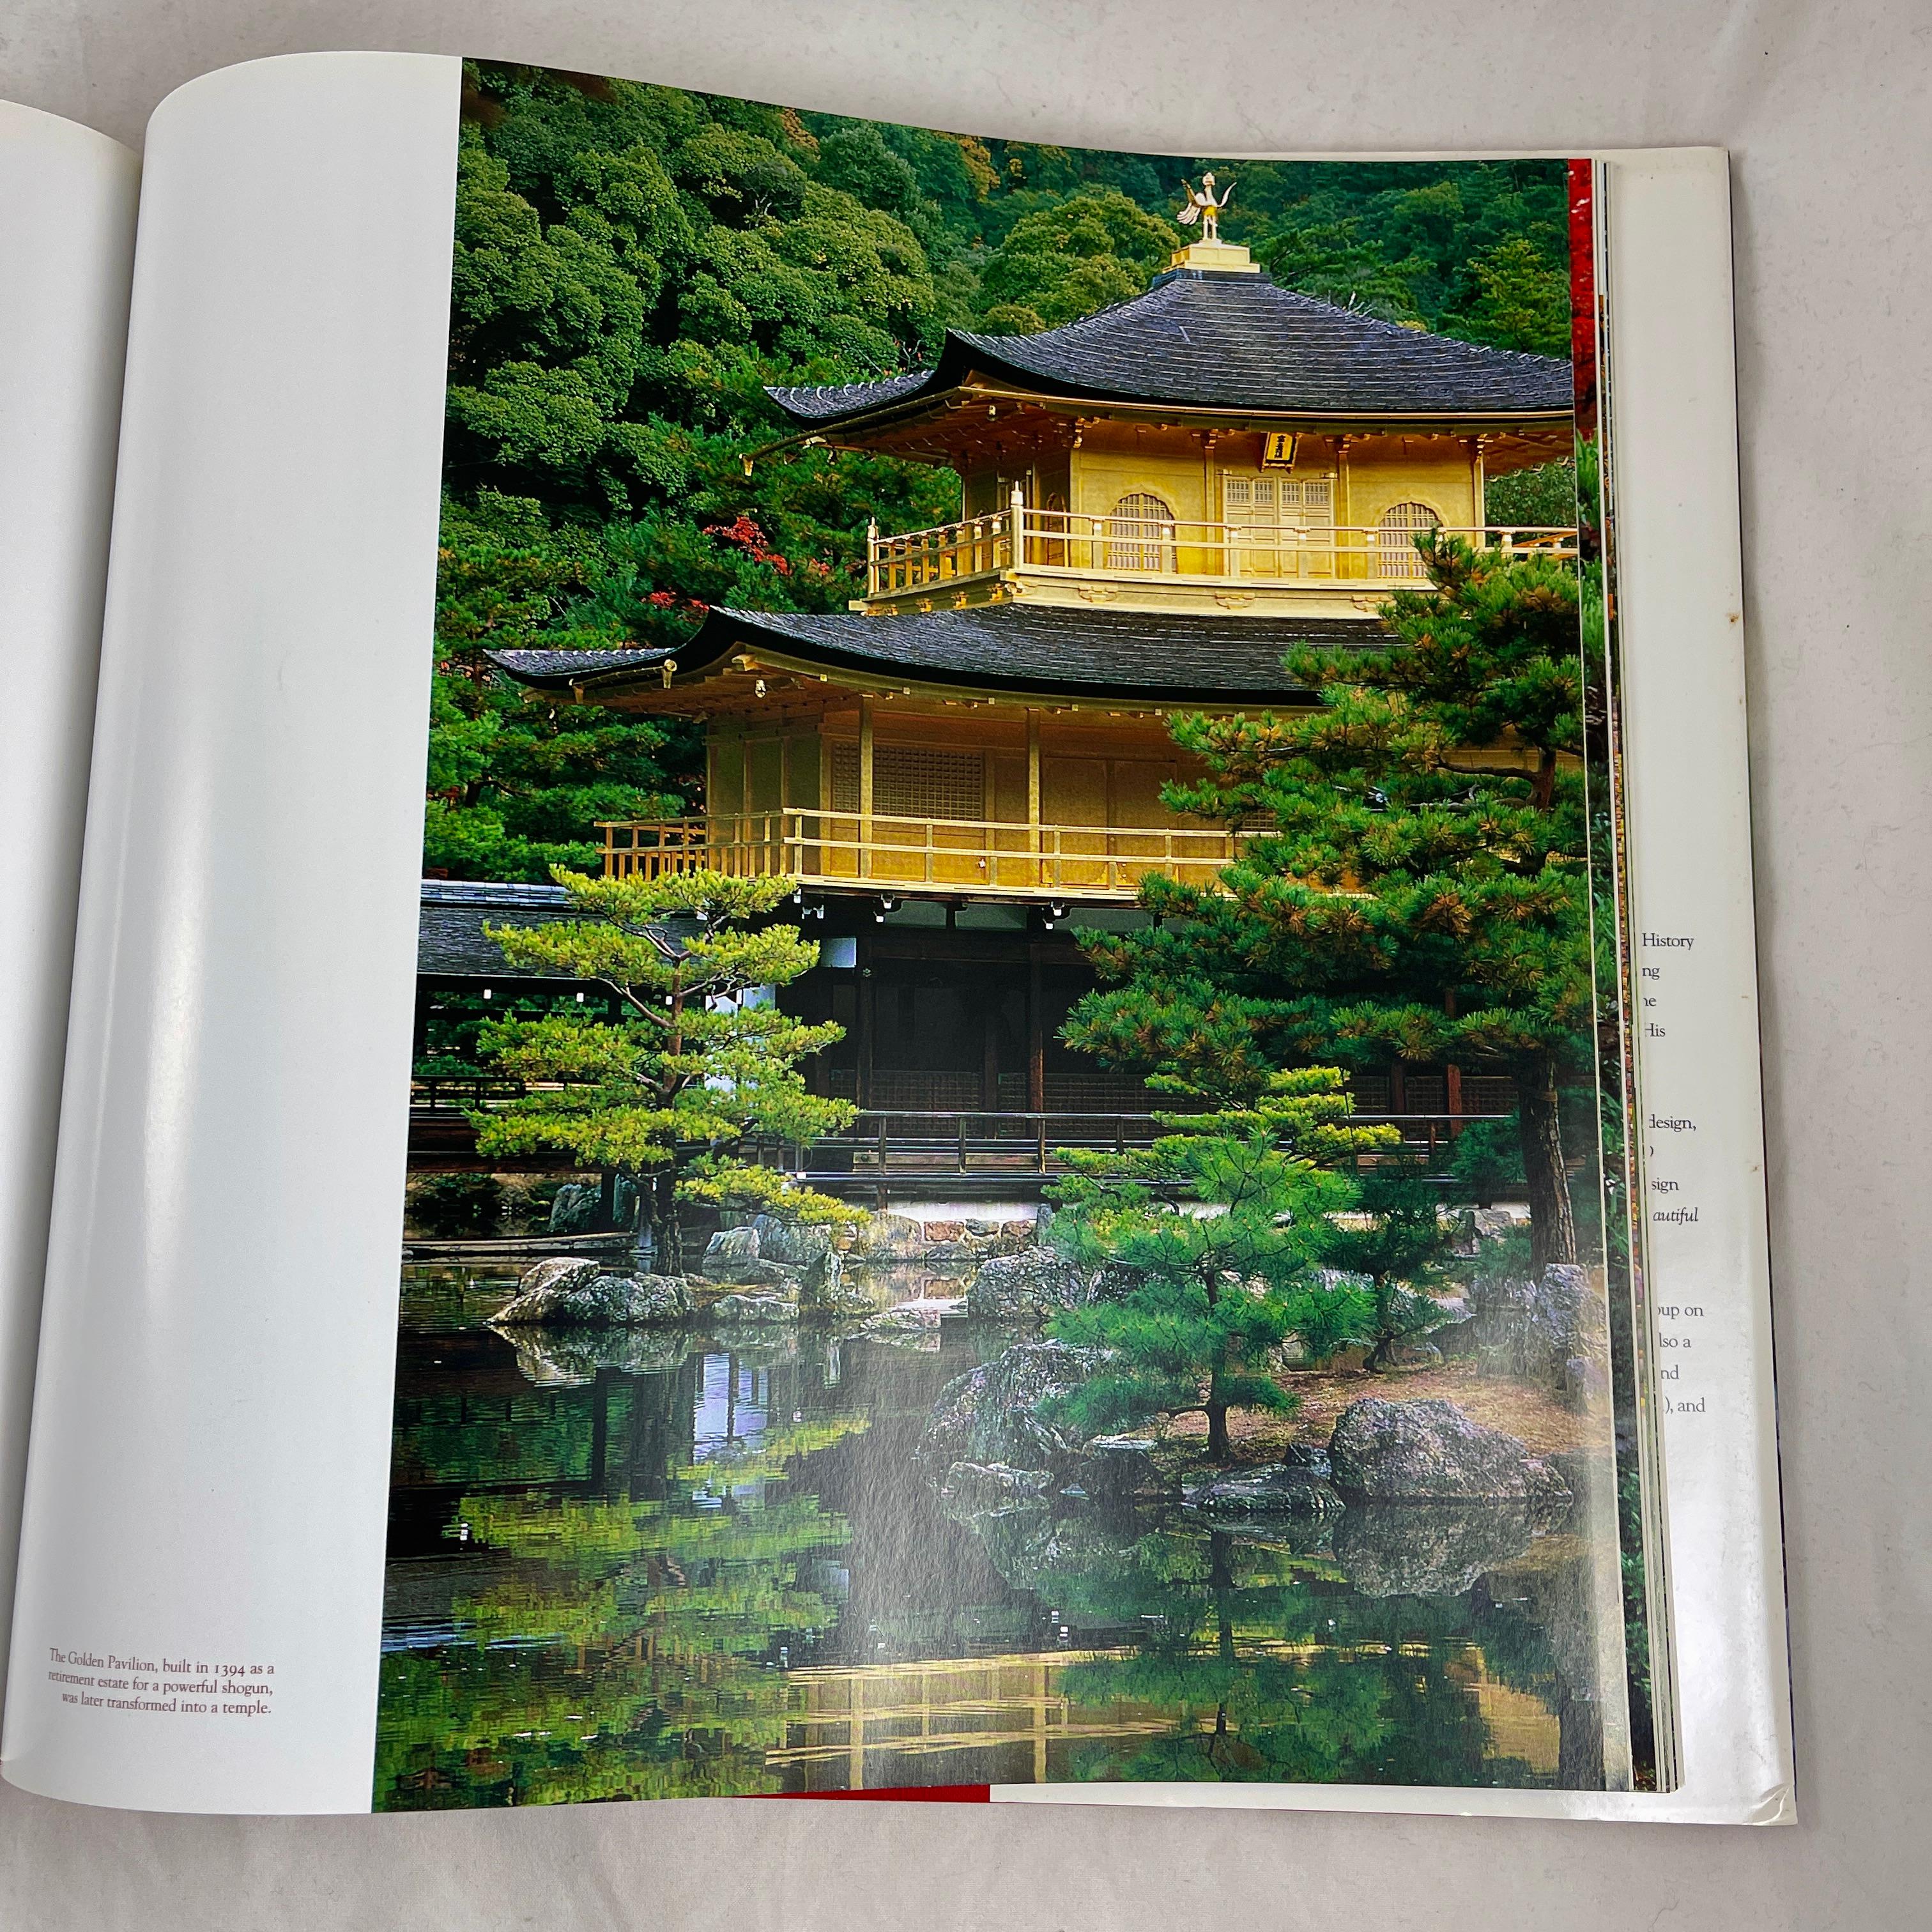 International Style The Most Beautiful Gardens in the World, Hardcover Book, 2004